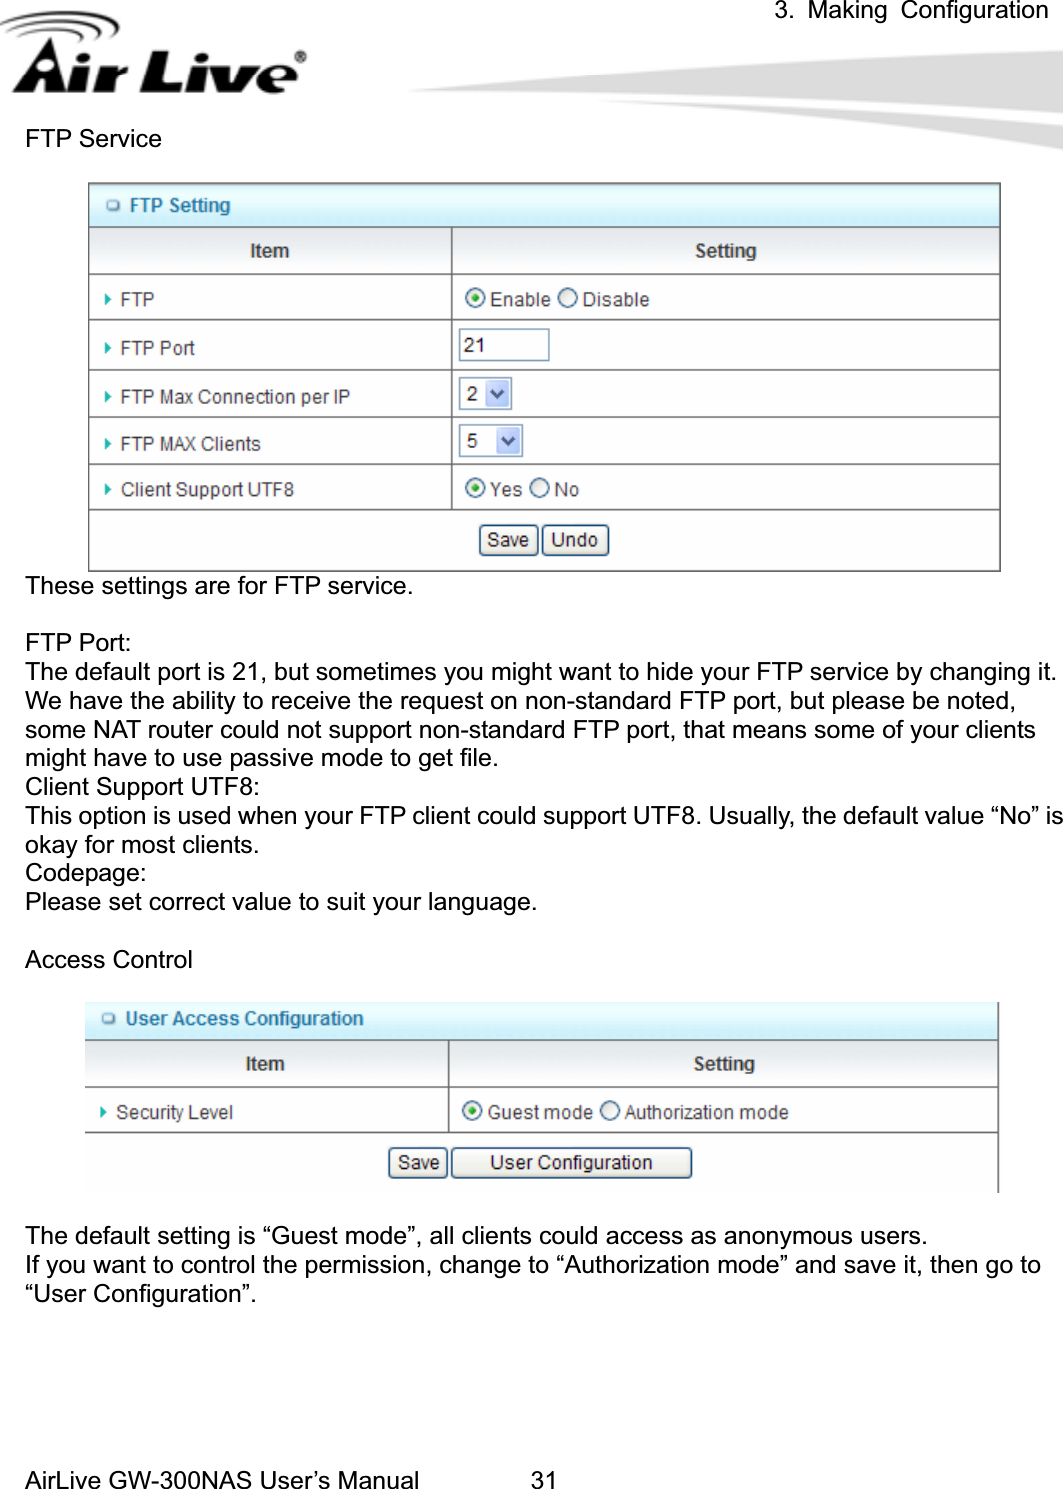 3. Making ConfigurationAirLive GW-300NAS User’s Manual 31FTP Service These settings are for FTP service. FTP Port: The default port is 21, but sometimes you might want to hide your FTP service by changing it. We have the ability to receive the request on non-standard FTP port, but please be noted, some NAT router could not support non-standard FTP port, that means some of your clients might have to use passive mode to get file. Client Support UTF8: This option is used when your FTP client could support UTF8. Usually, the default value “No” is okay for most clients. Codepage: Please set correct value to suit your language. Access Control The default setting is “Guest mode”, all clients could access as anonymous users. If you want to control the permission, change to “Authorization mode” and save it, then go to “User Configuration”. 